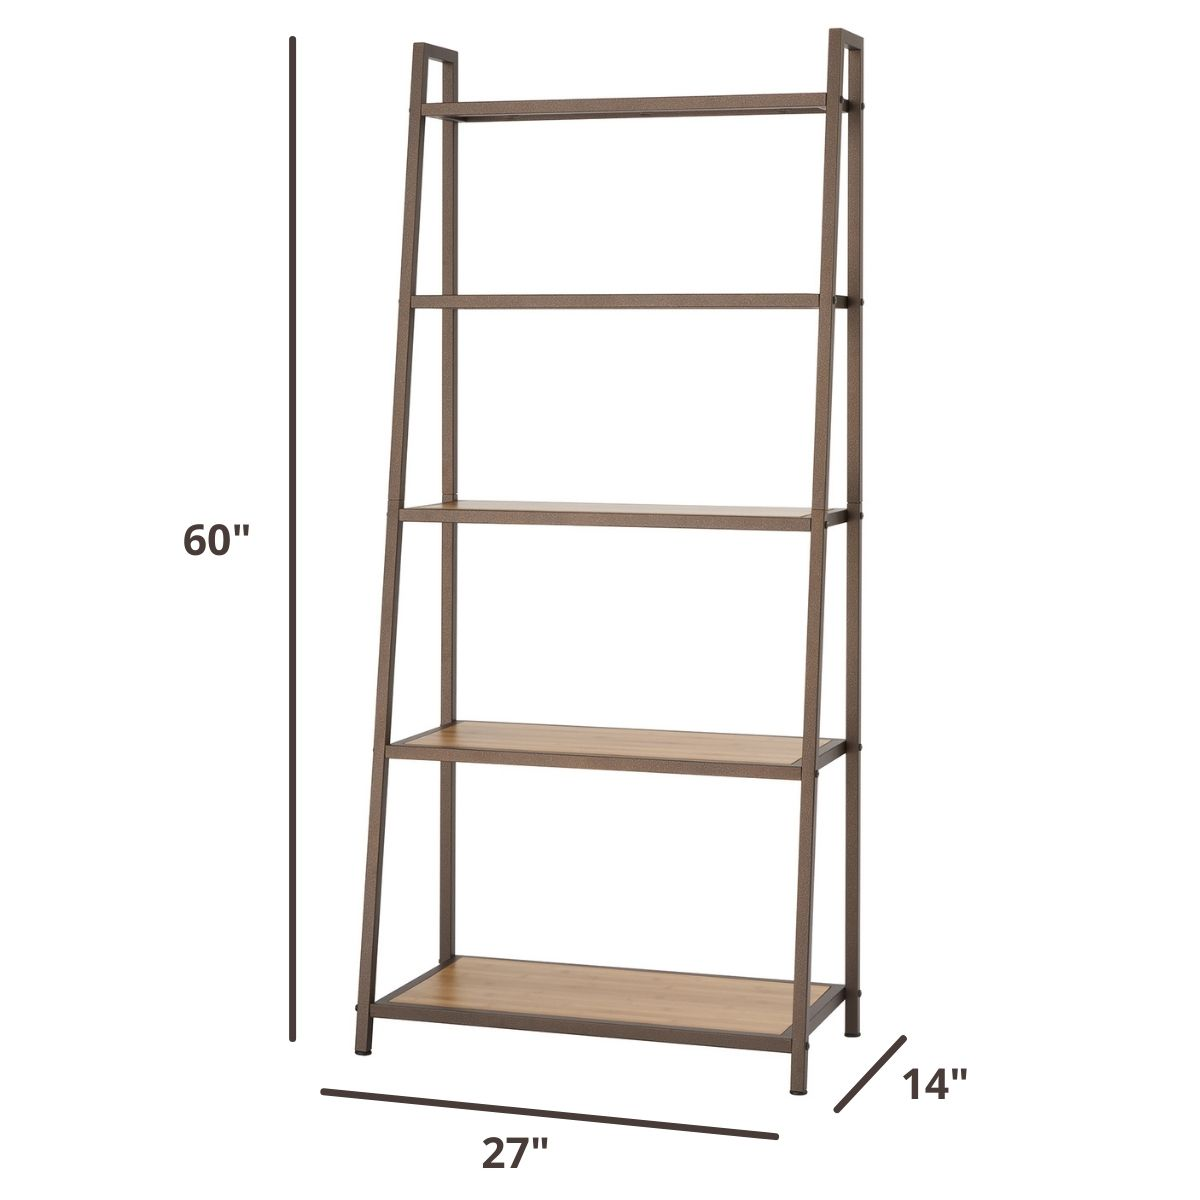 60 inches tall by 27 inches wide by 14 inches deep leaning shelving rack